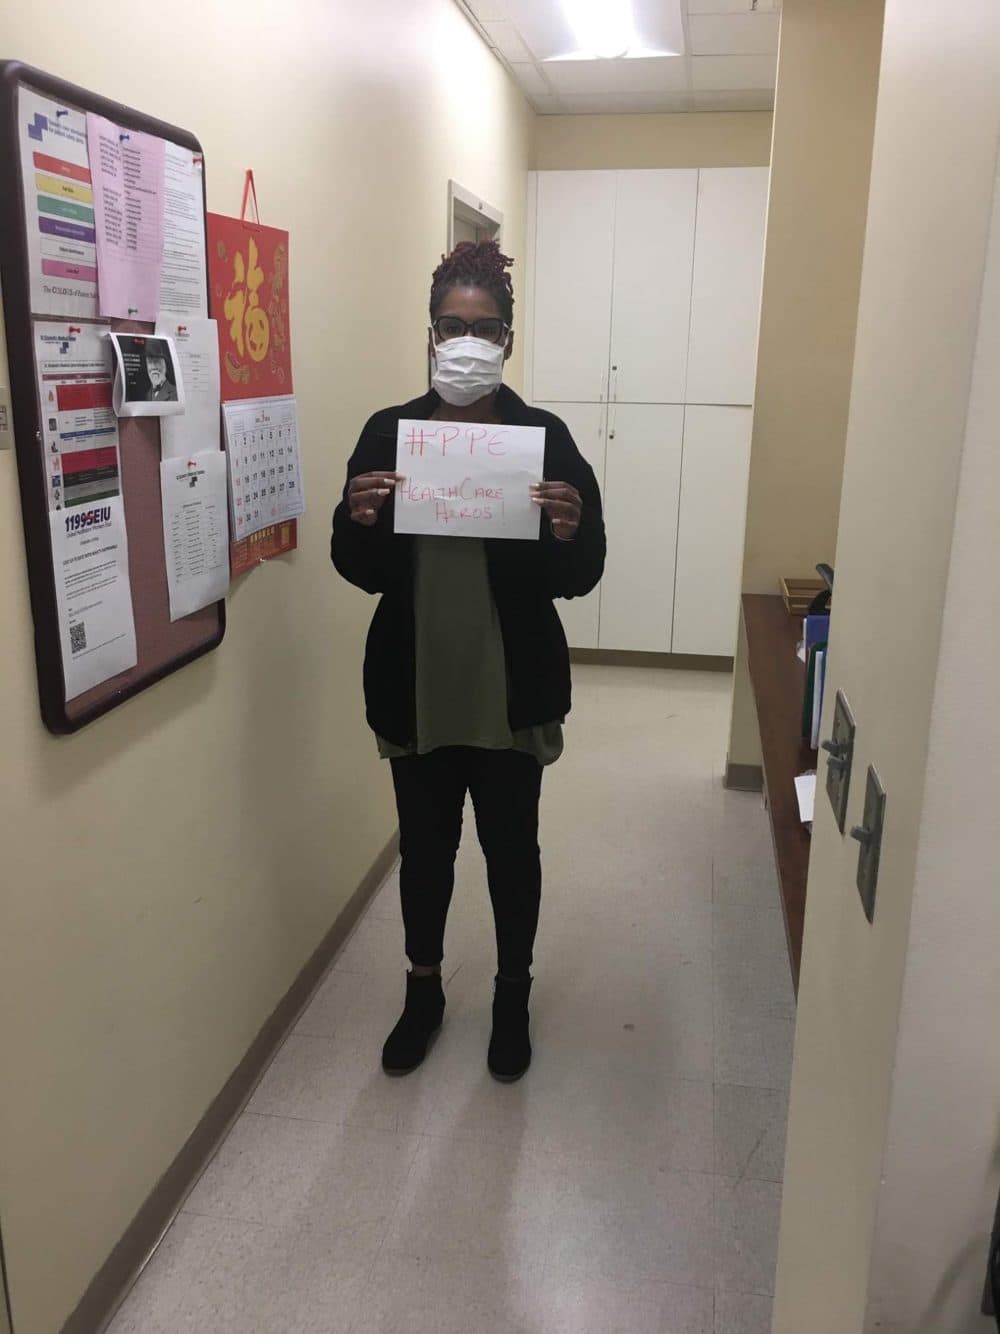 Alyssa Bartholomew, a lead patient access coordinator, is among the health care workers demanding more personal protective equipment to prevent infecting themselves and their families. (Courtesy Alyssa Bartholomew)